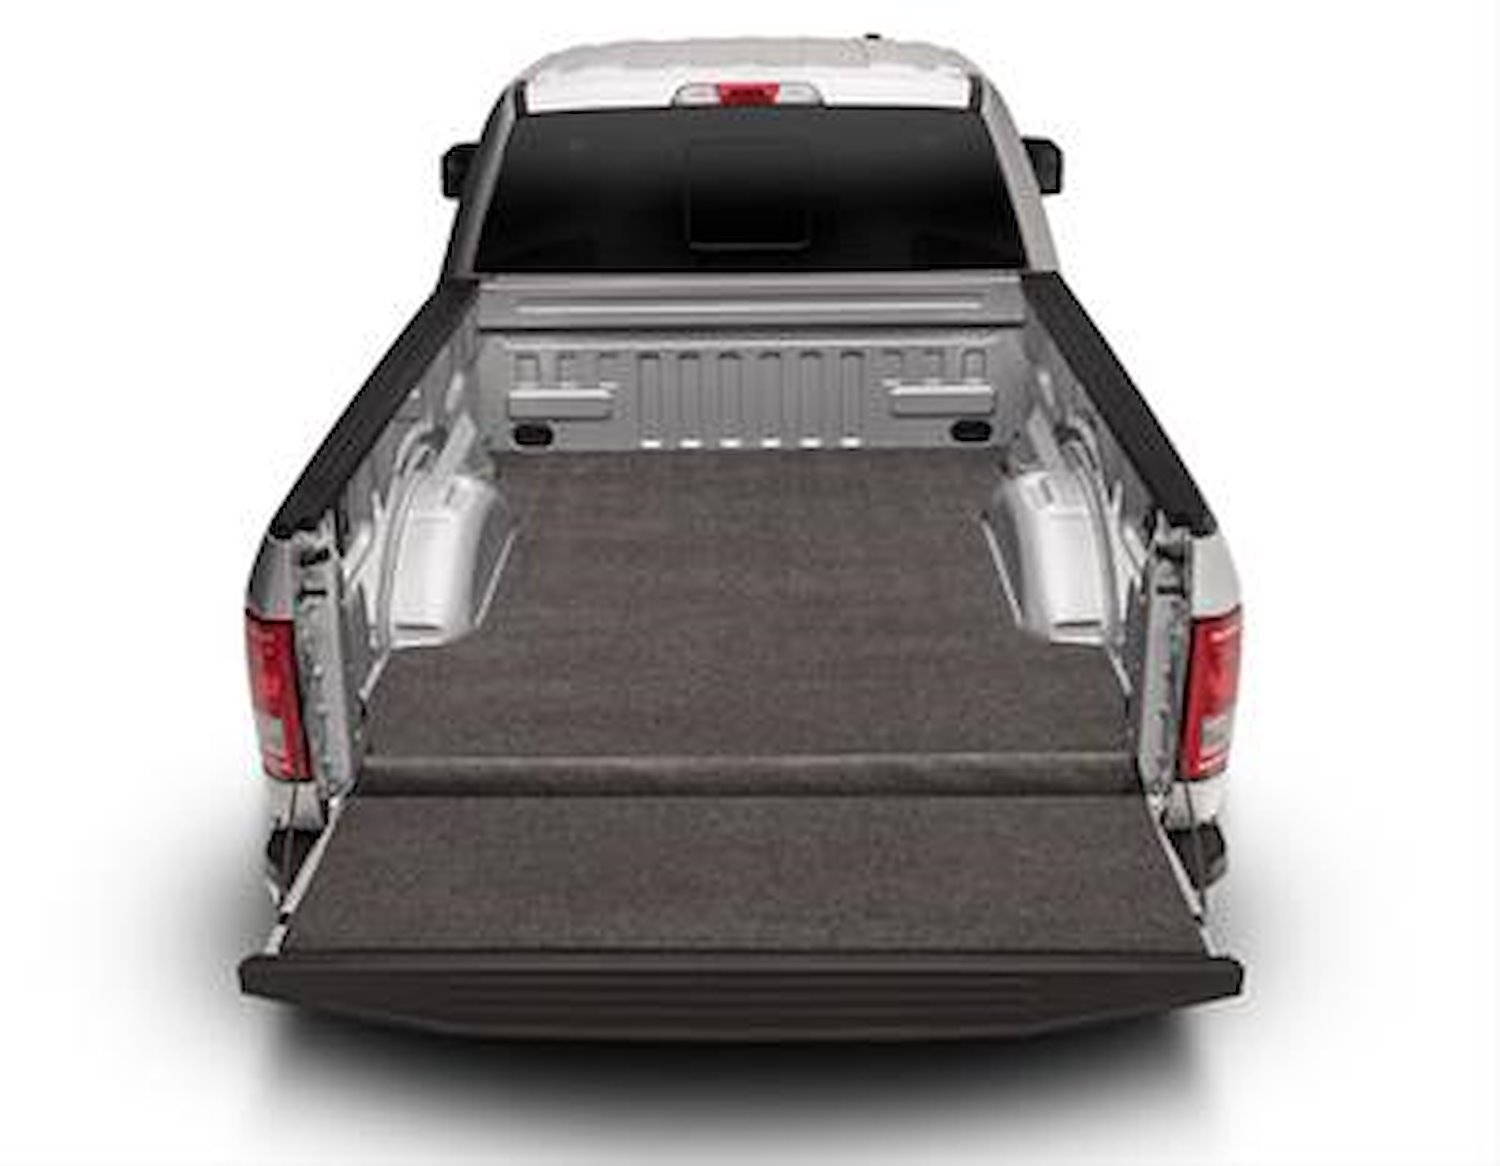 XLTBMY05DCS XLT BEDMAT FOR SPRAY-IN OR NO BED LINER 05+ TOYOTA TACOMA 5' BED